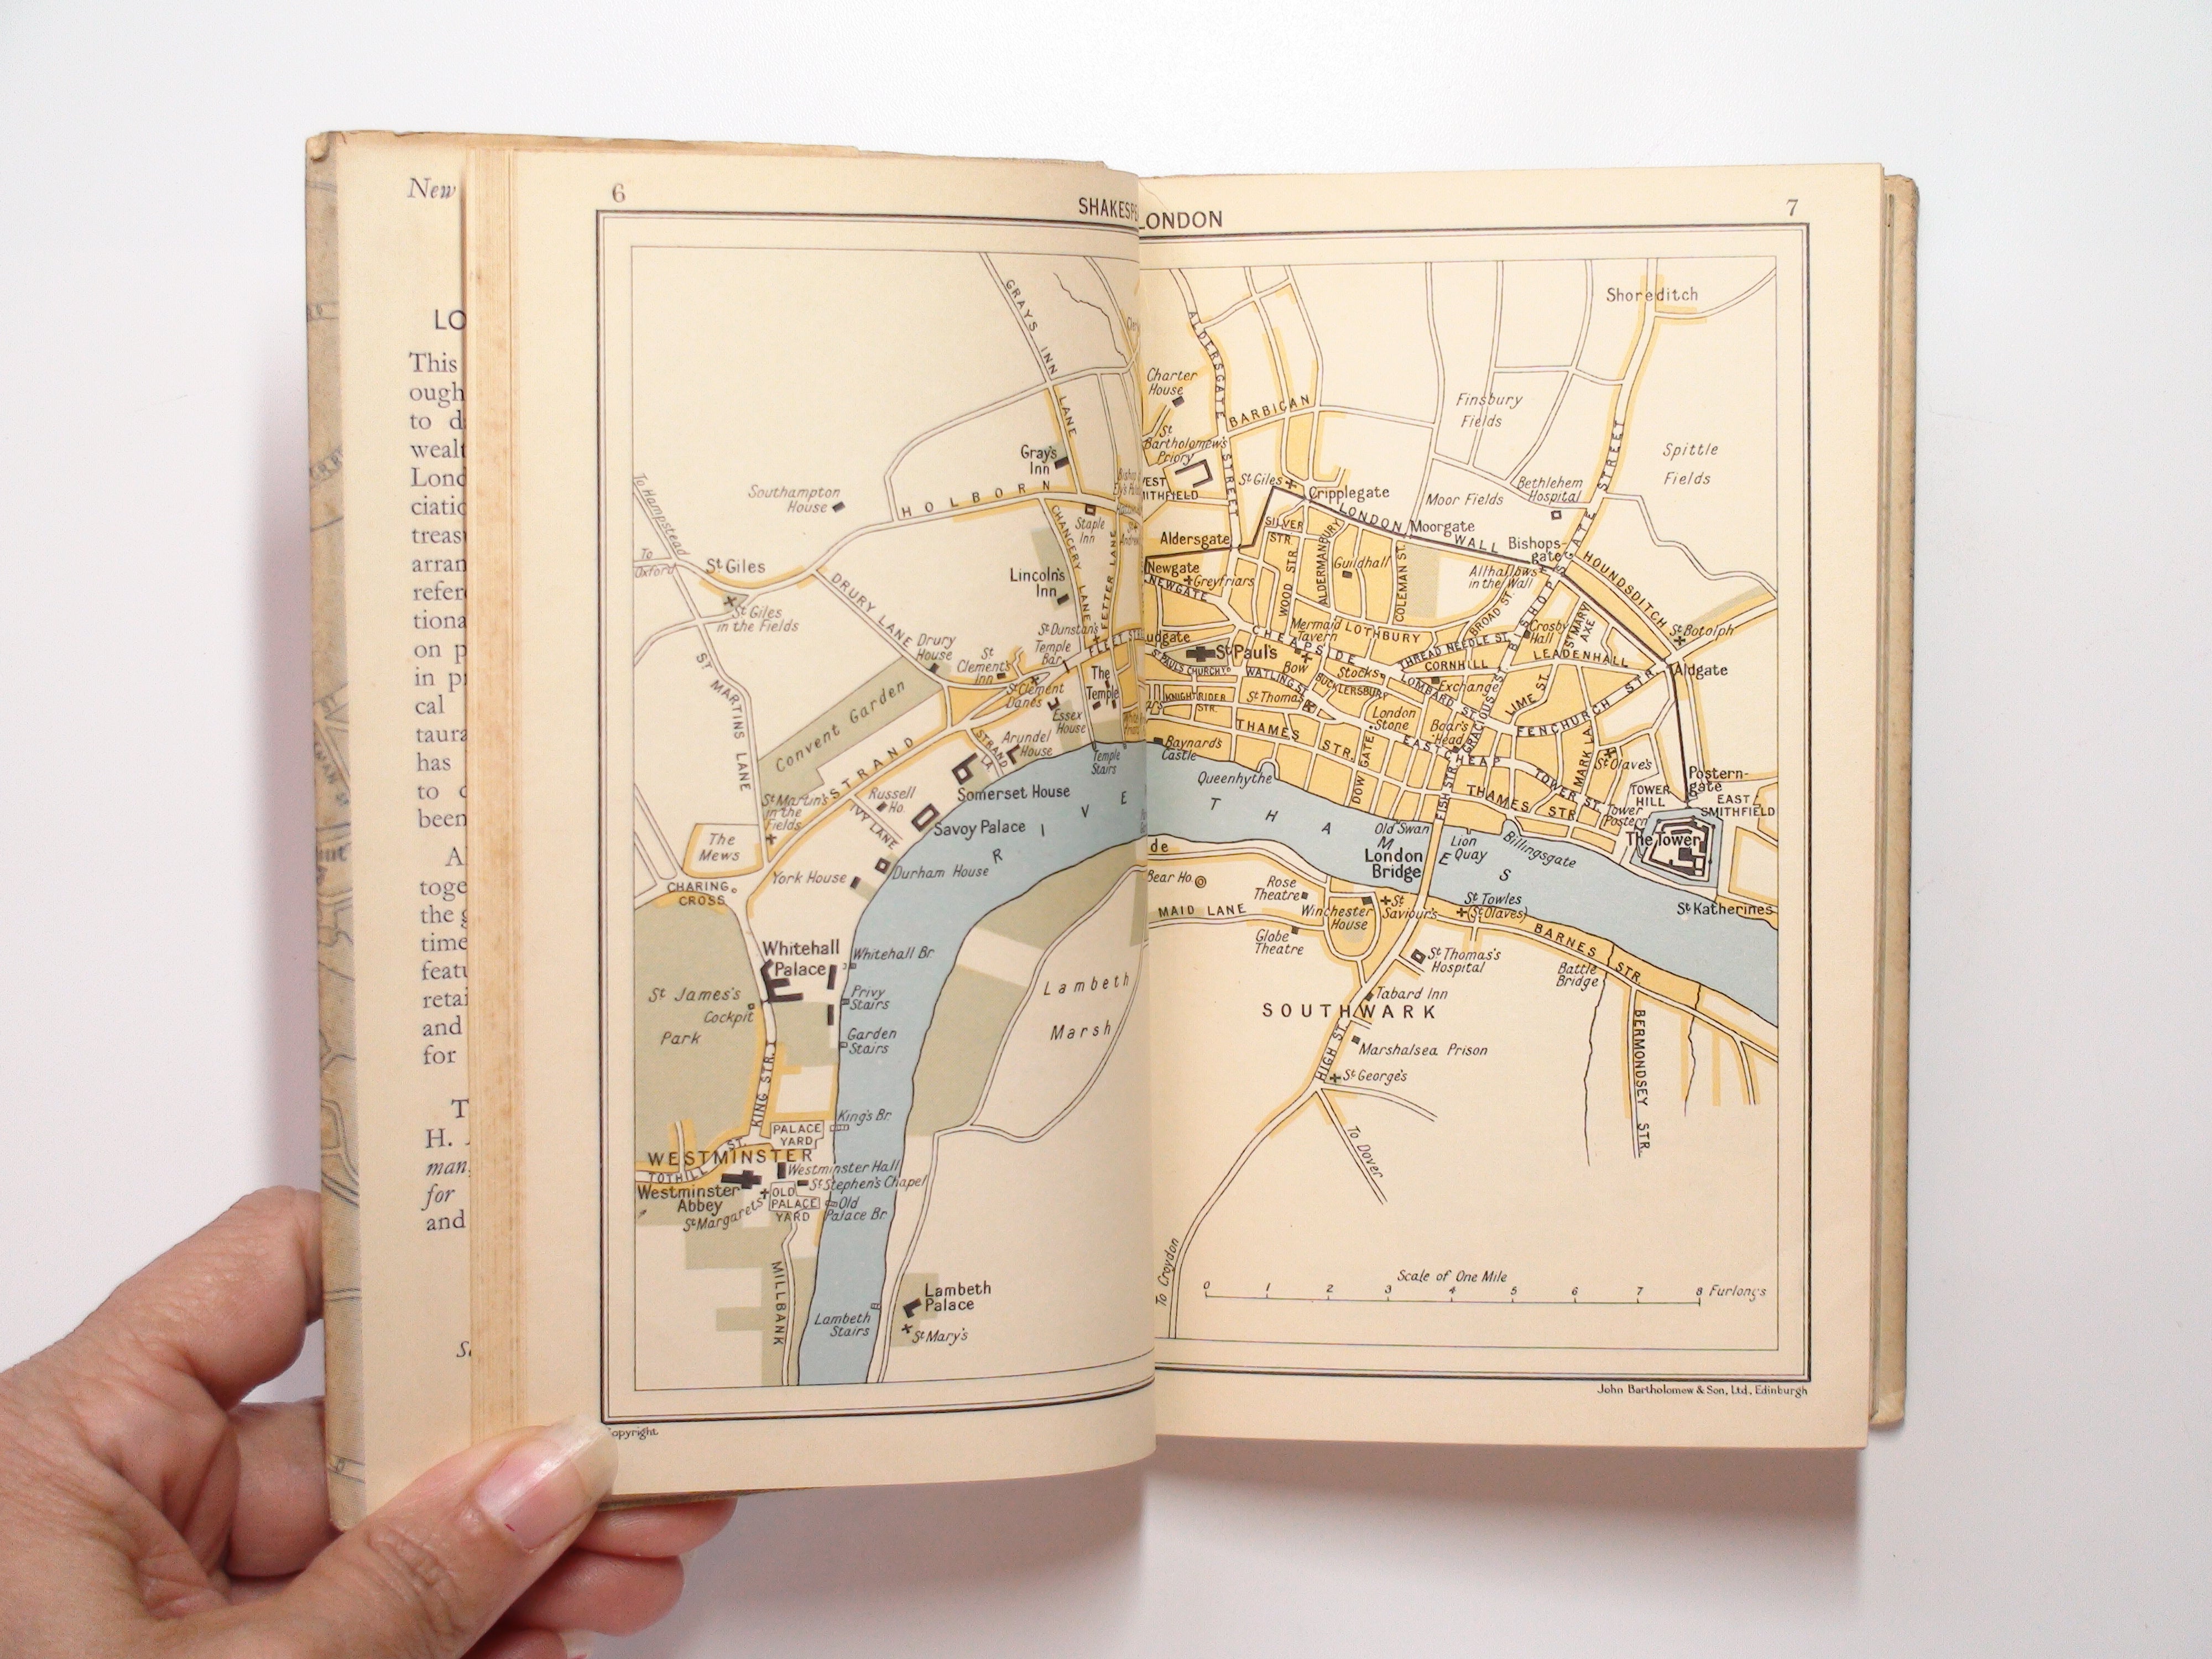 London for Everyman, by William Kent, With Colored Maps, 1956